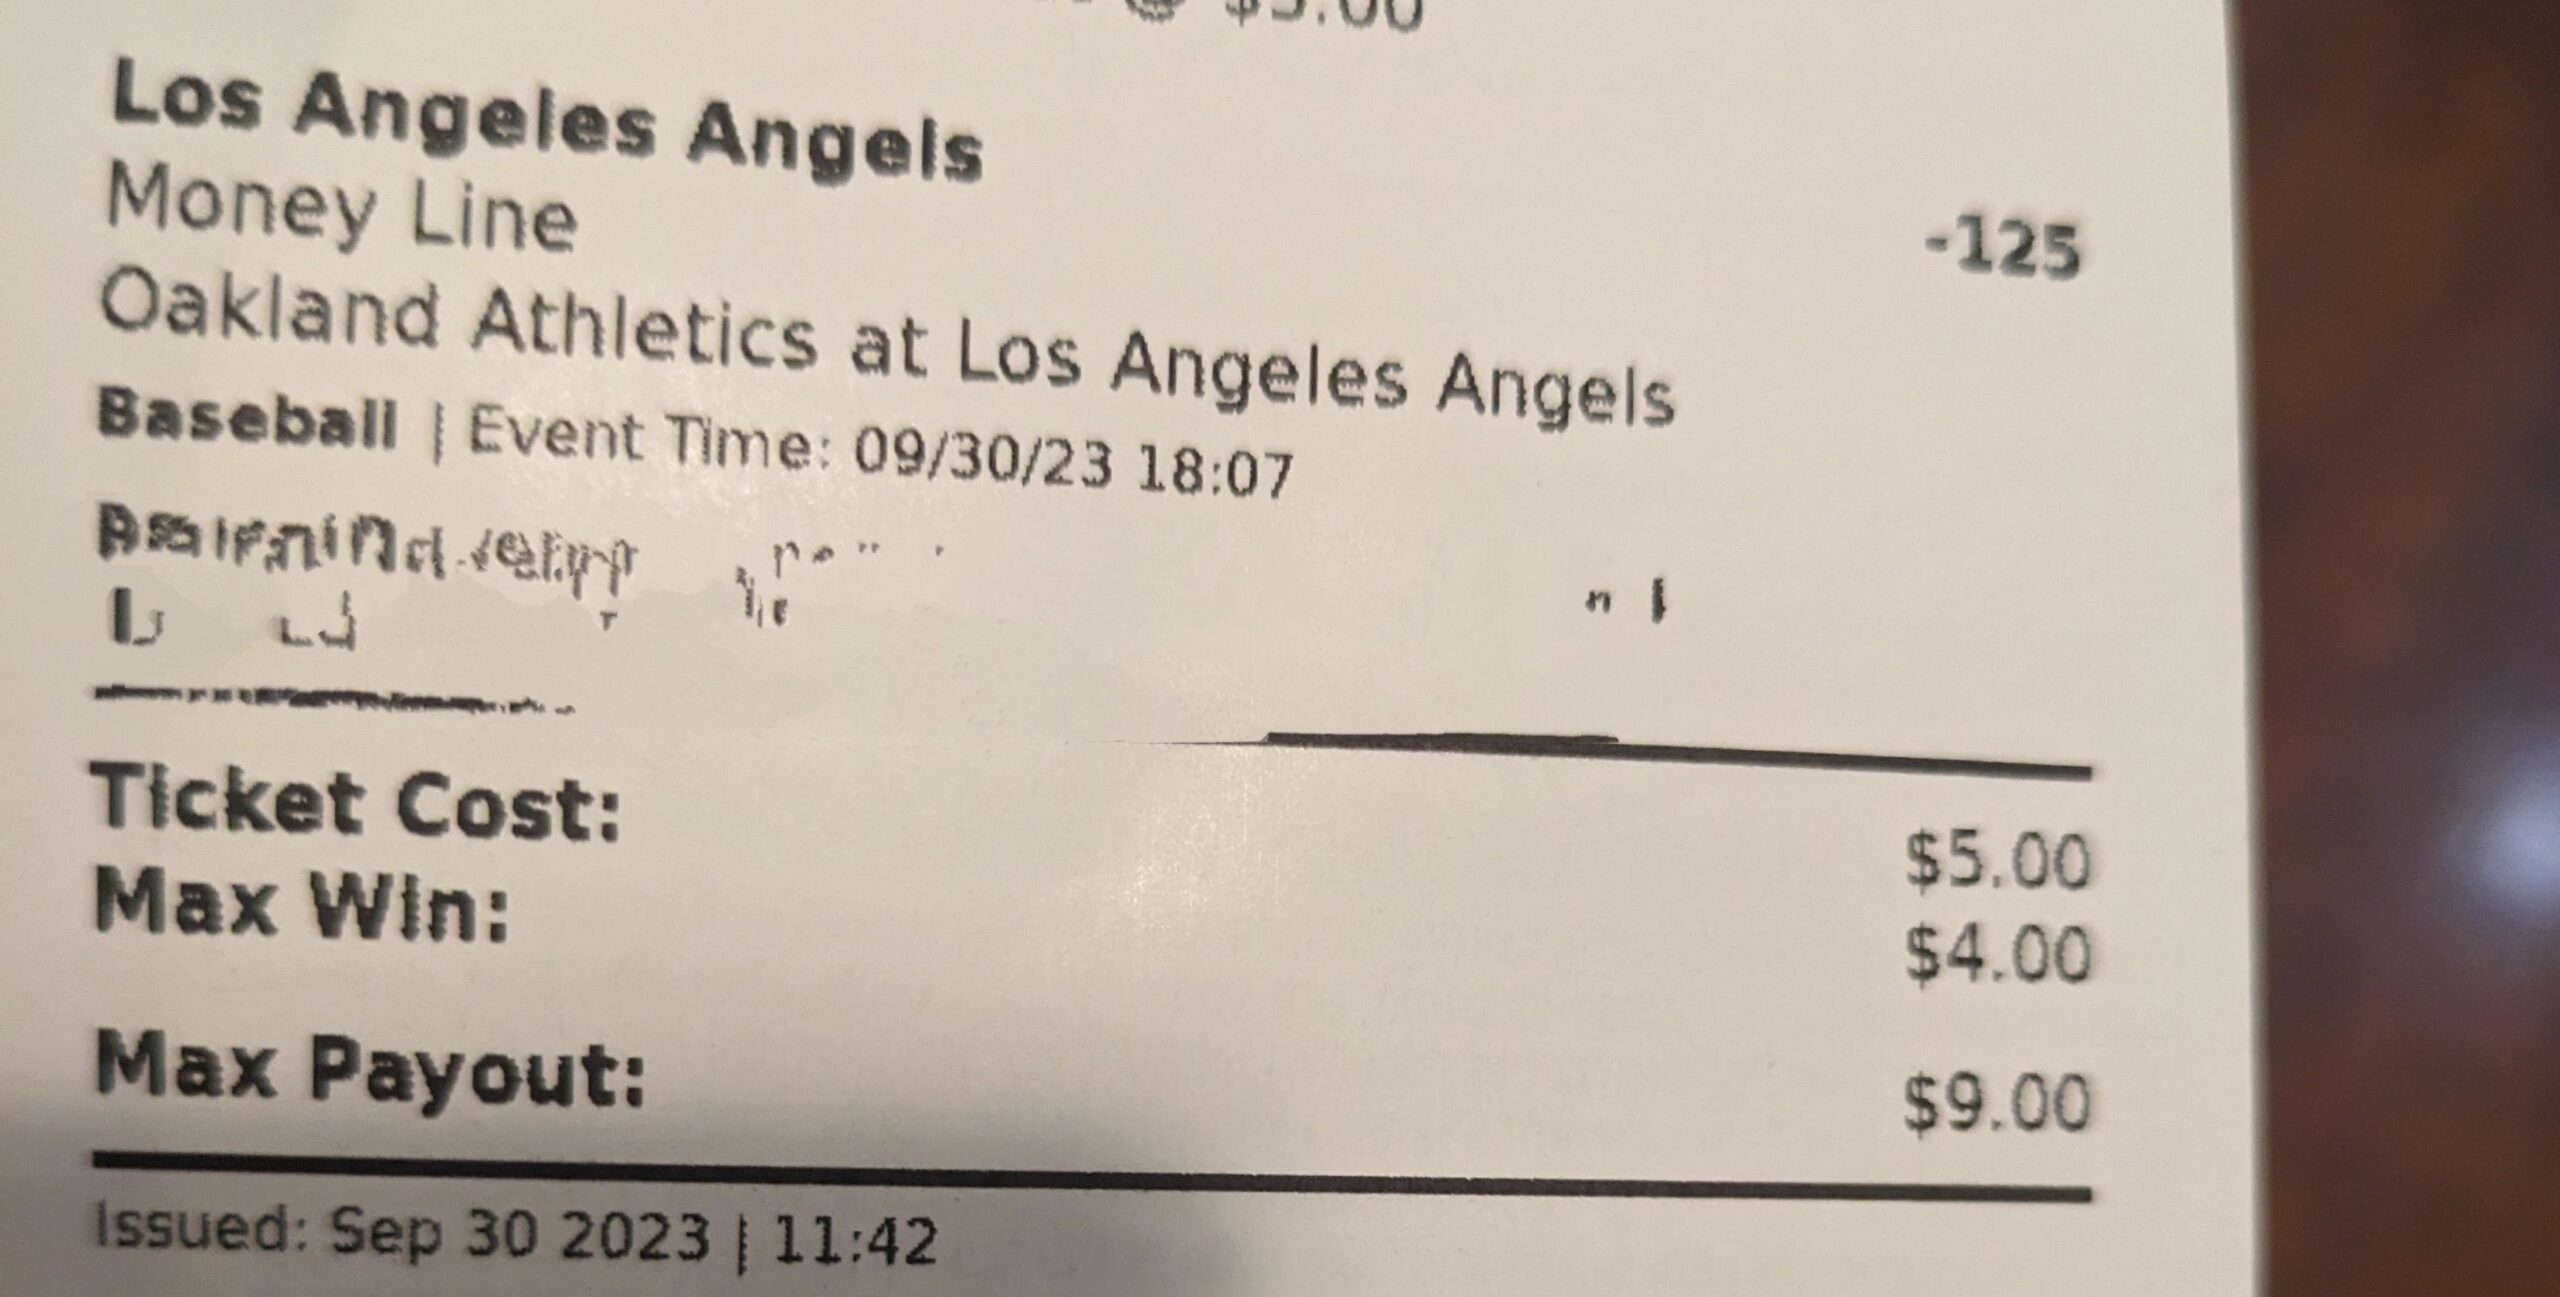 Never made a sports bet before, but when you’re in vegas